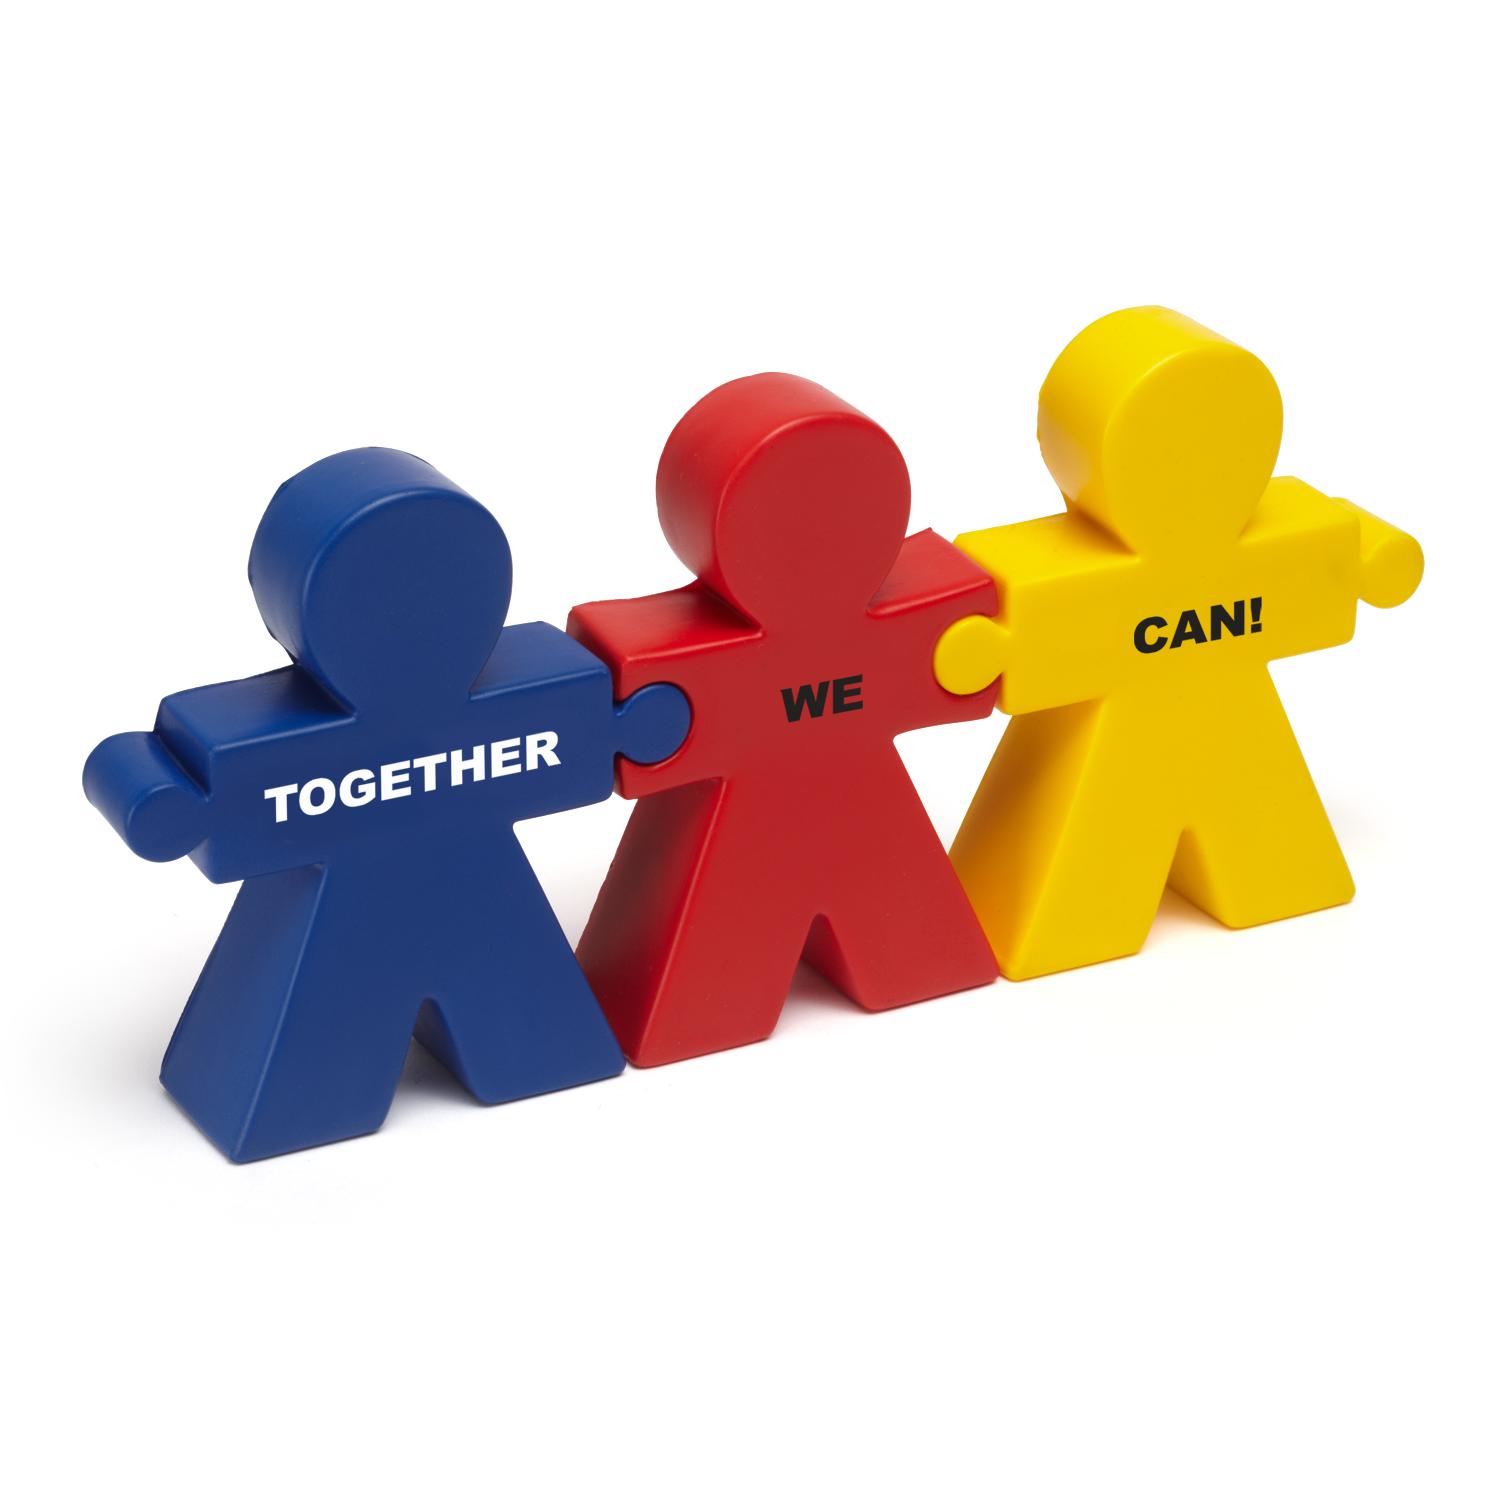 free clipart images teamwork - photo #2